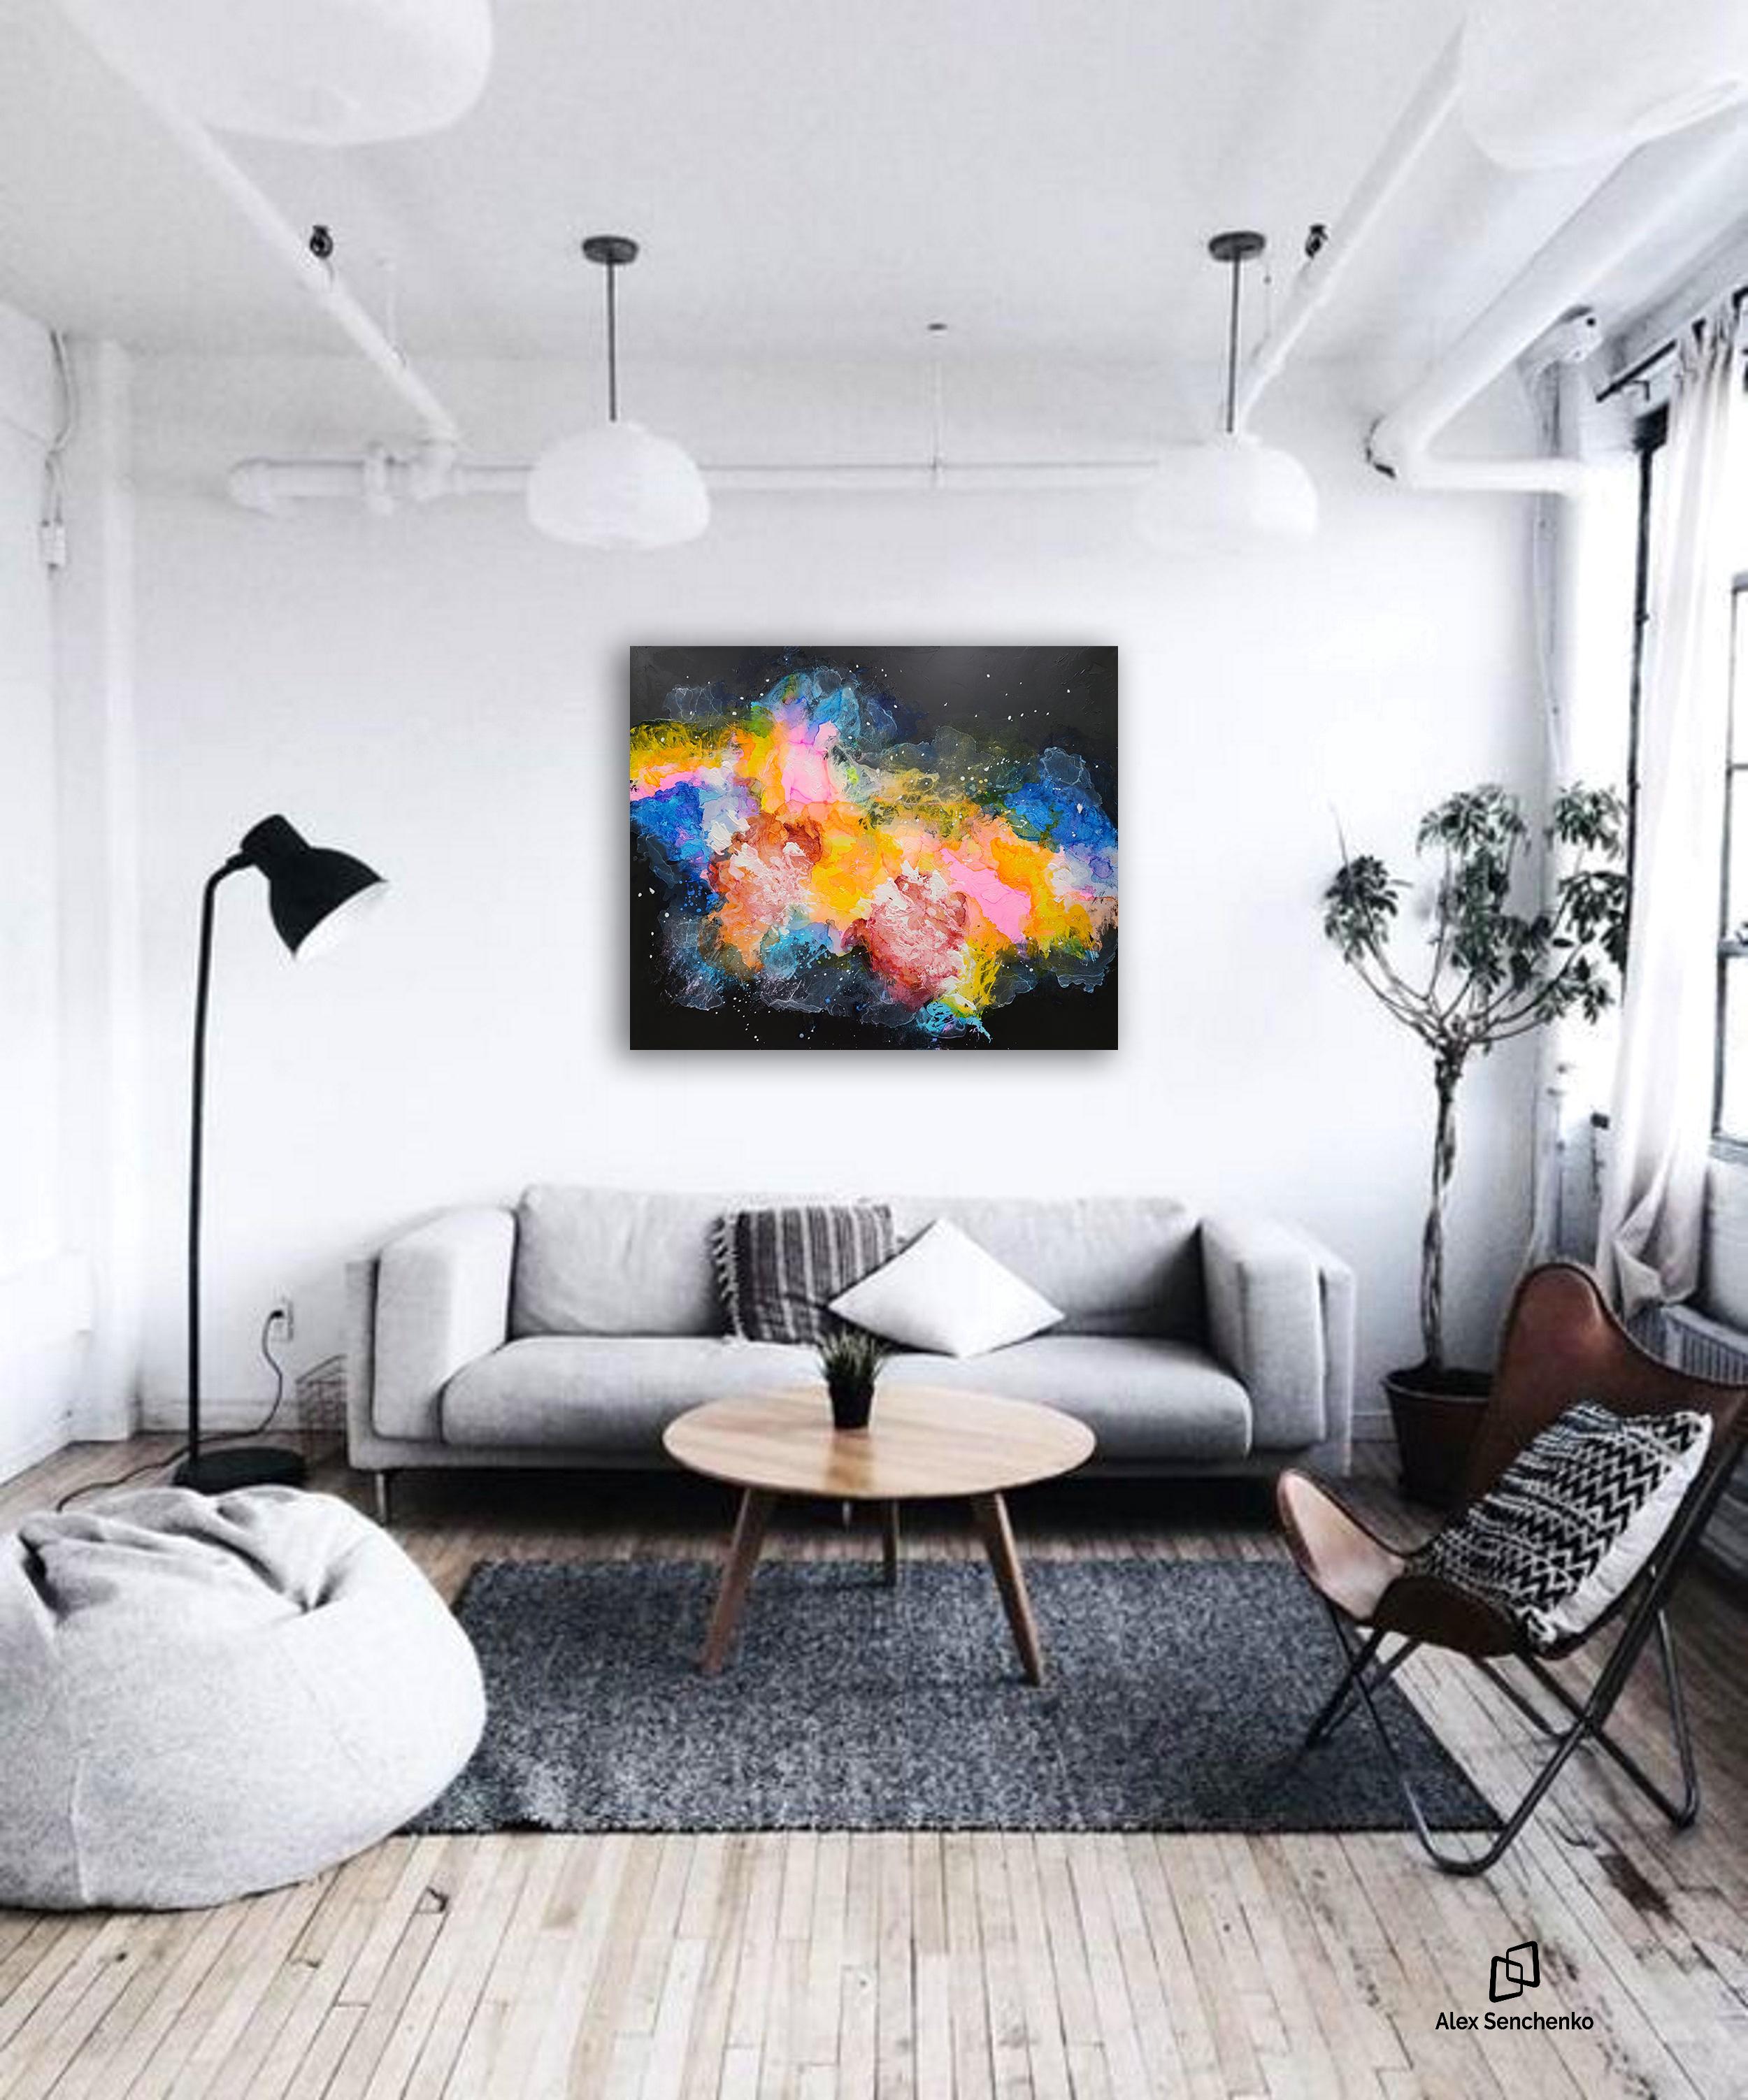 A great way to bring abstract colors into any room! This fine painting is an original piece of
artwork stretched on canvas that can be hung on the wall to make your wall looks
stunning. This artwork would look contemporary in any room to add